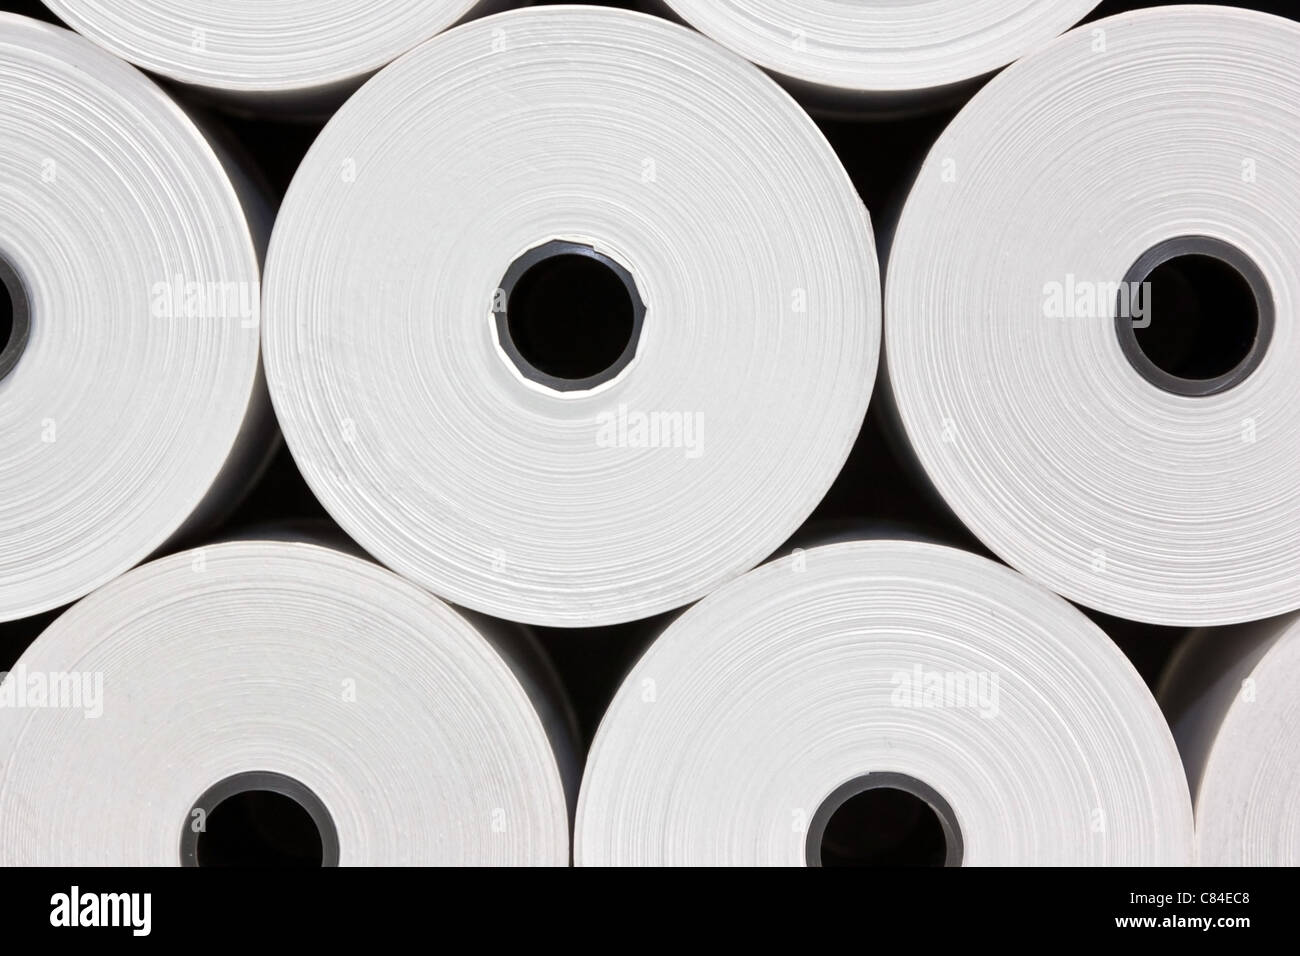 A set of White Paper Rolls on a pile Stock Photo